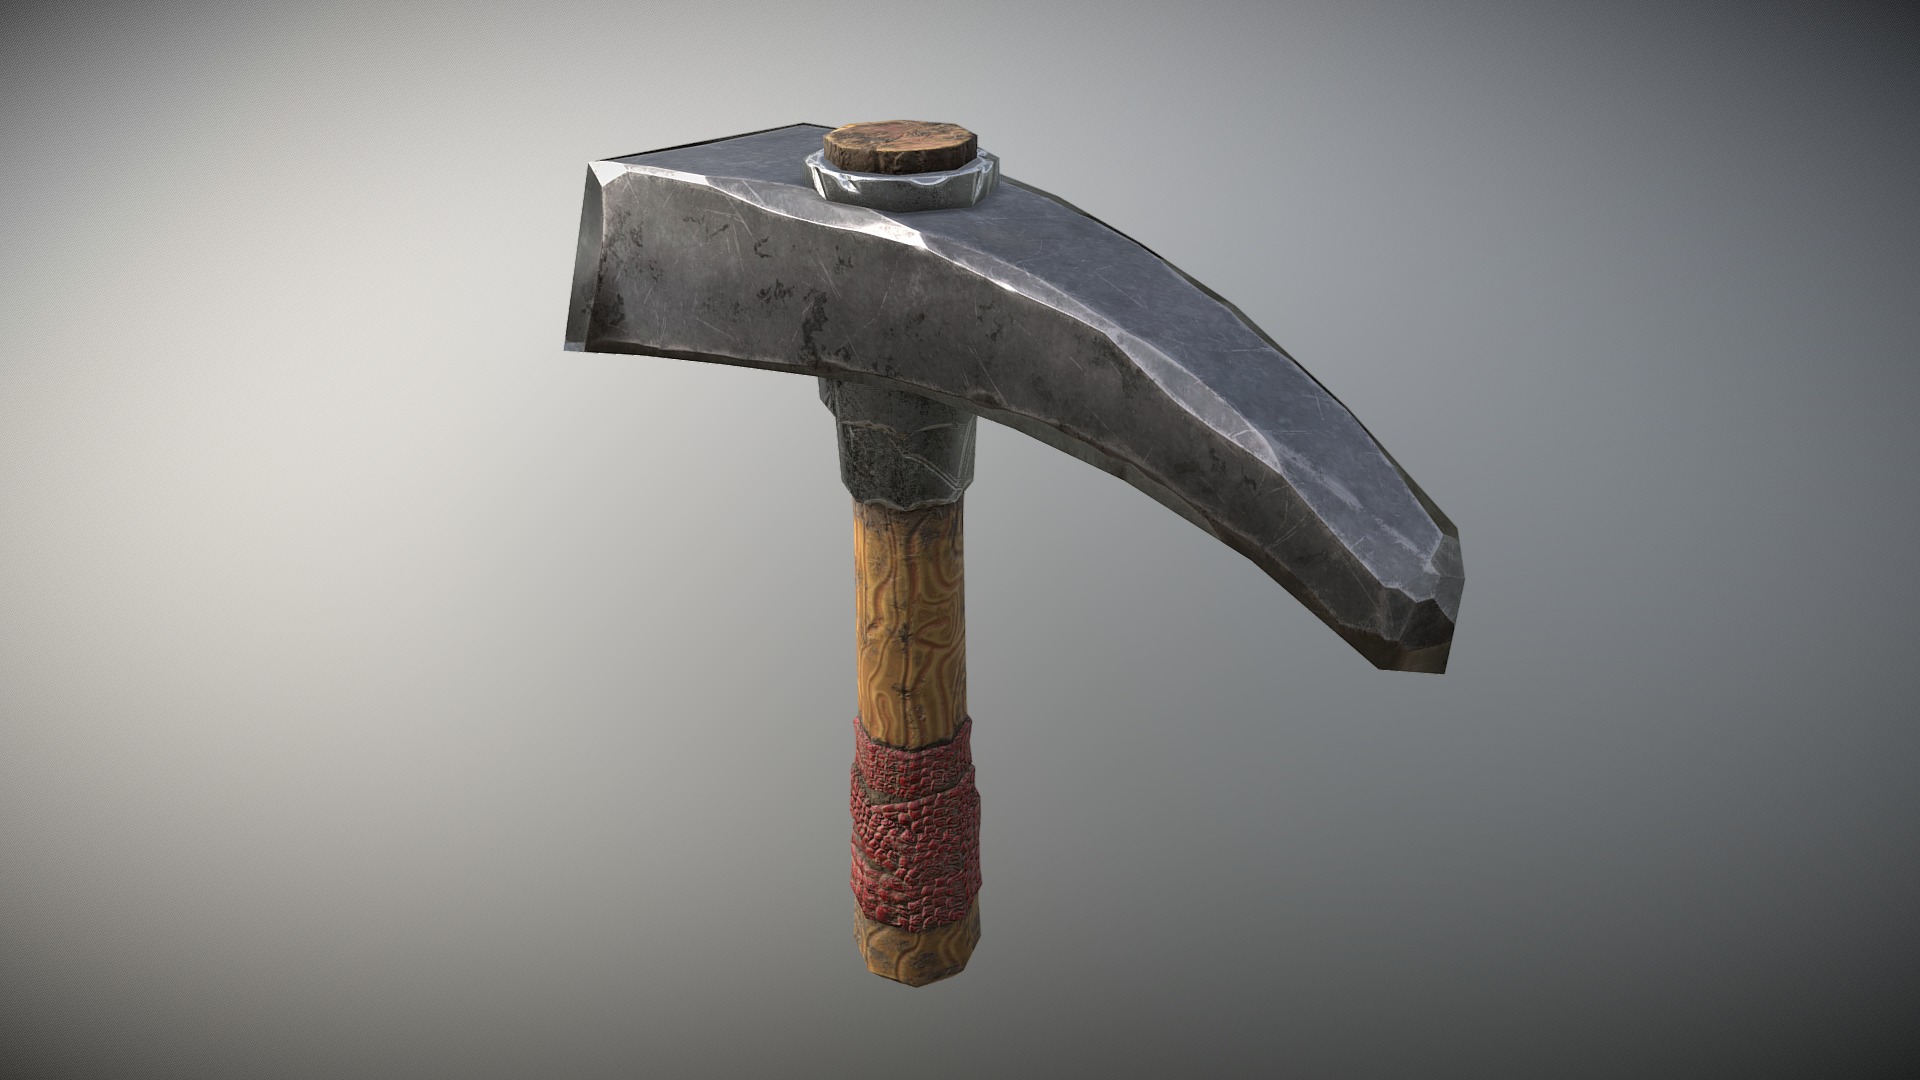 3D model Pick Axe - This is a 3D model of the Pick Axe. The 3D model is about a wooden cross with a red and gold cross on top.